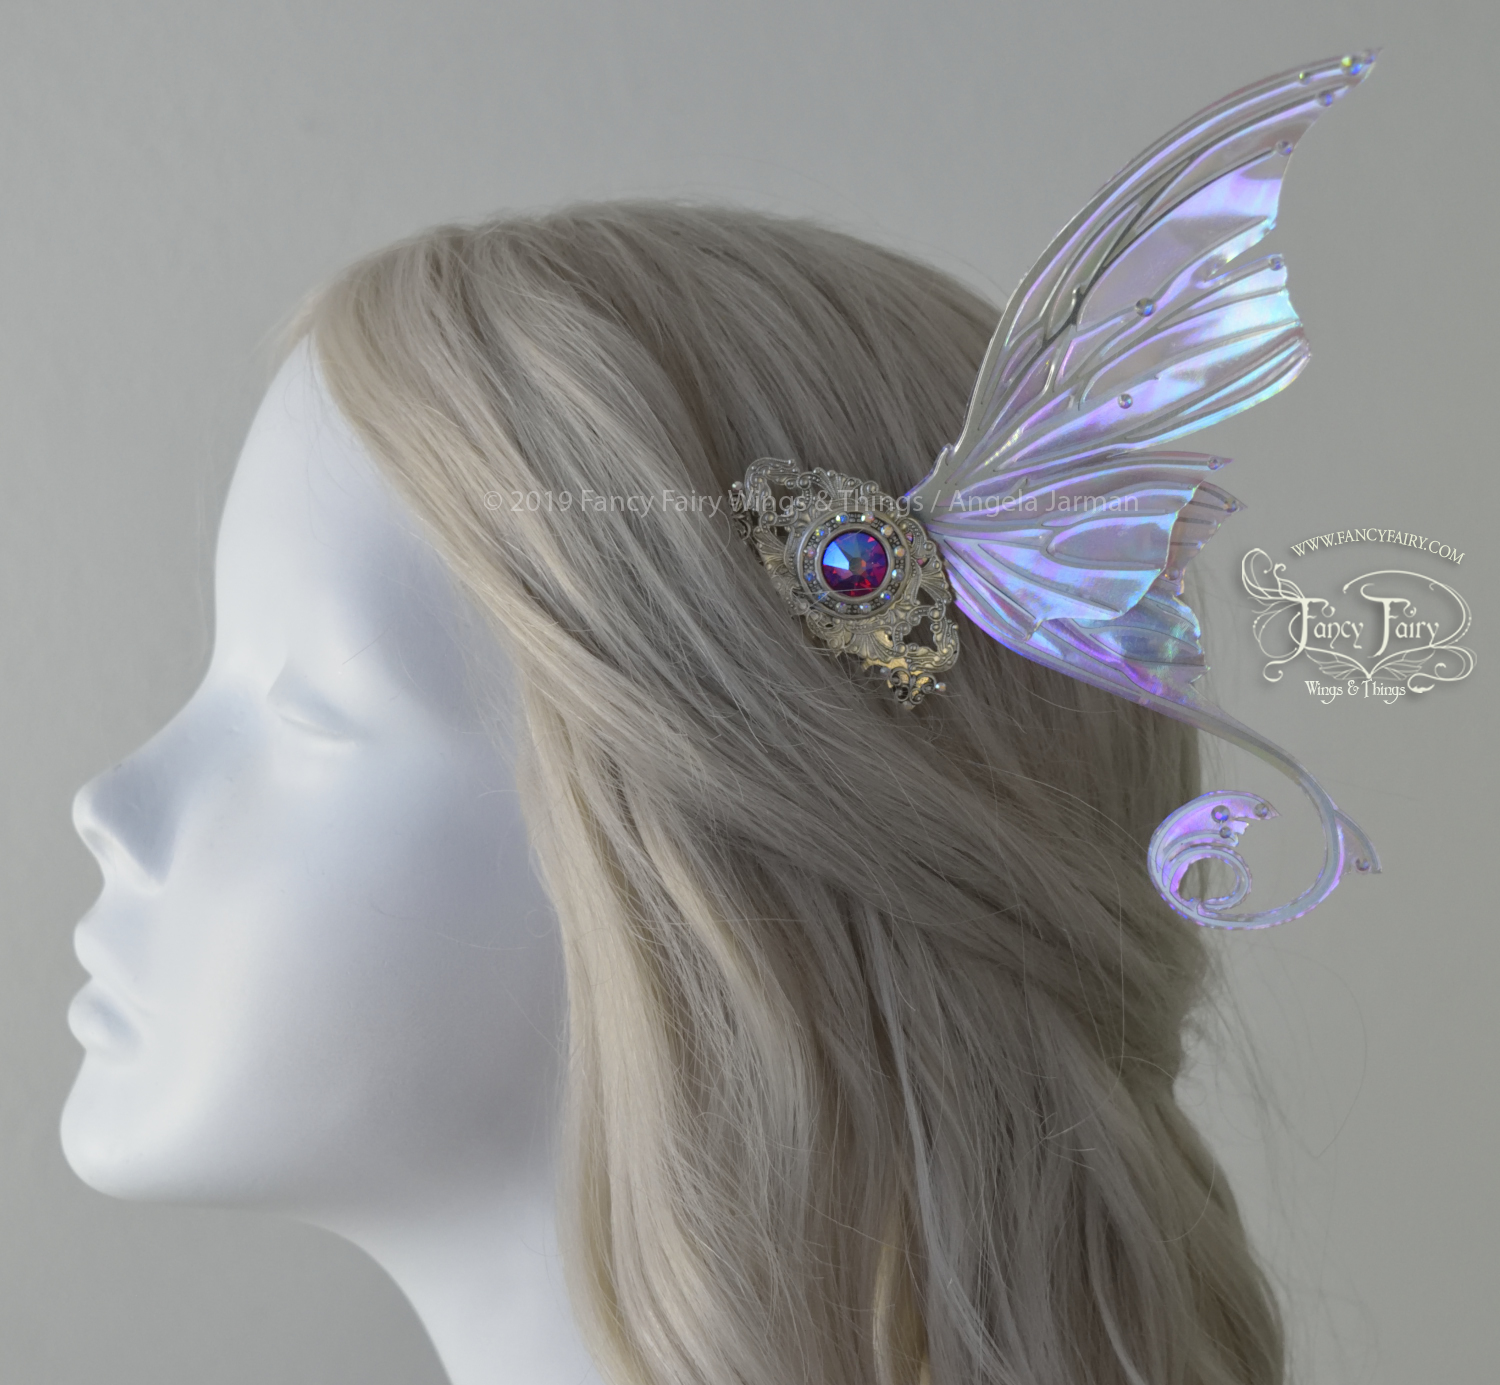 Hair Accessory and Doll Fairy Wings - Sale Friday, 1/25 at 8pm PST — Fancy  Fairy Wings & Things